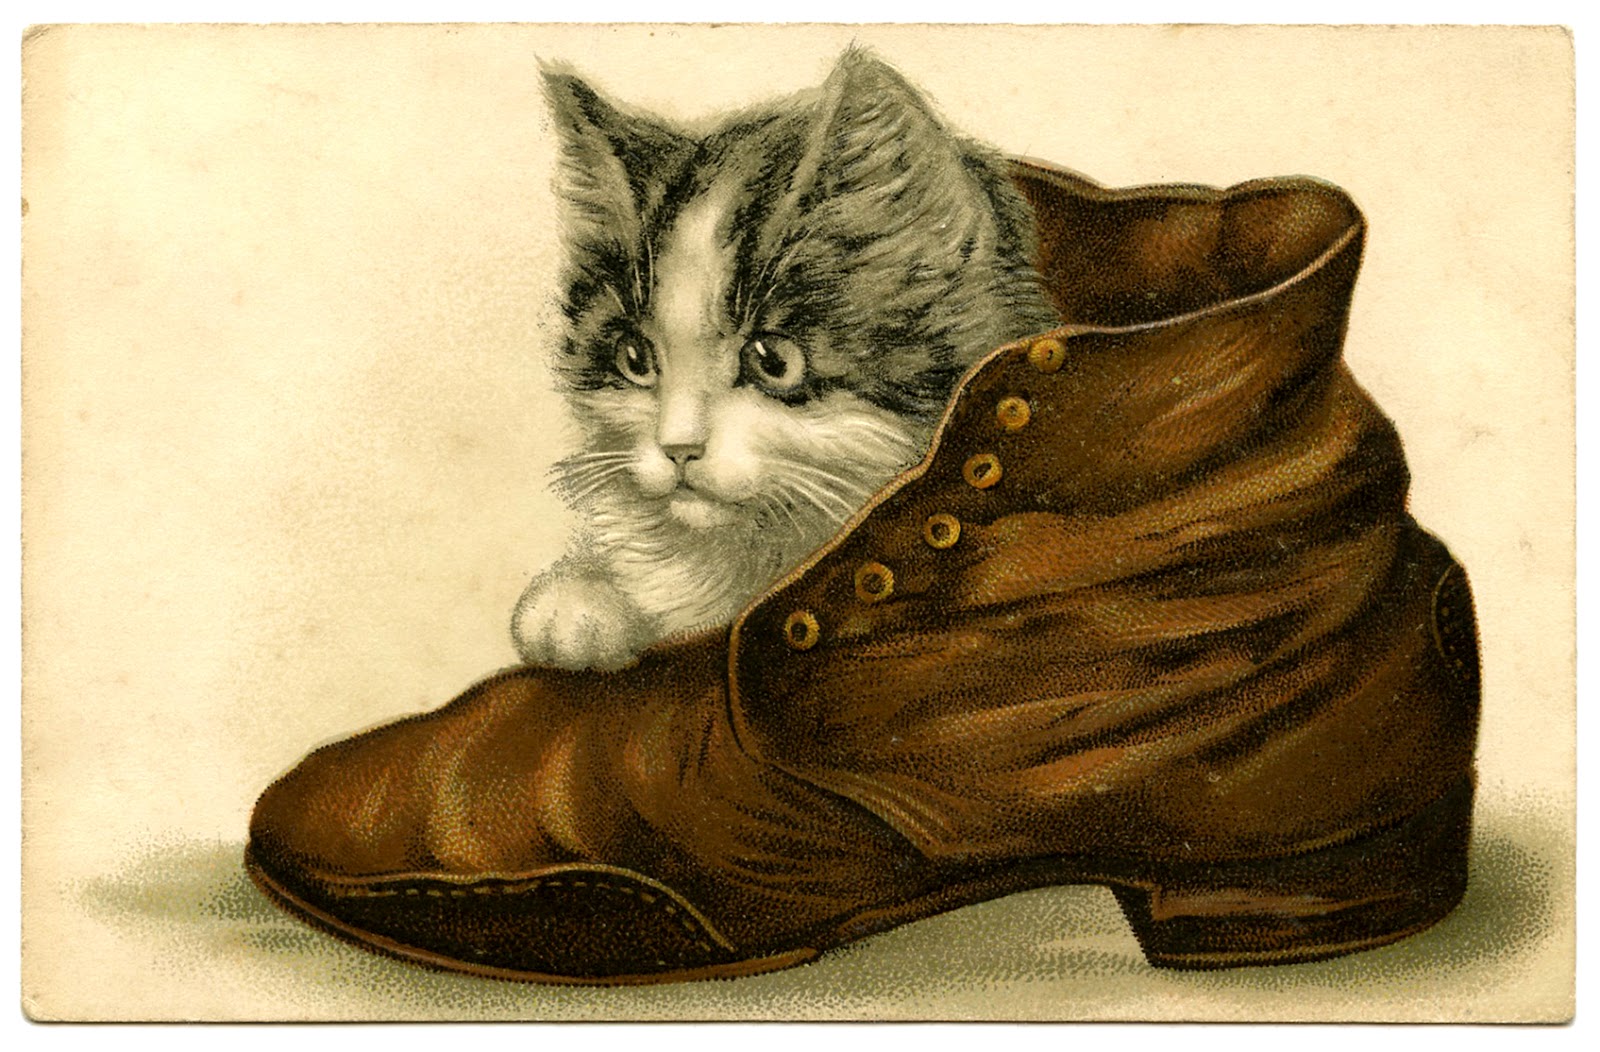 Vintage Graphic - Sweetest Kitten in Shoe - The Graphics Fairy